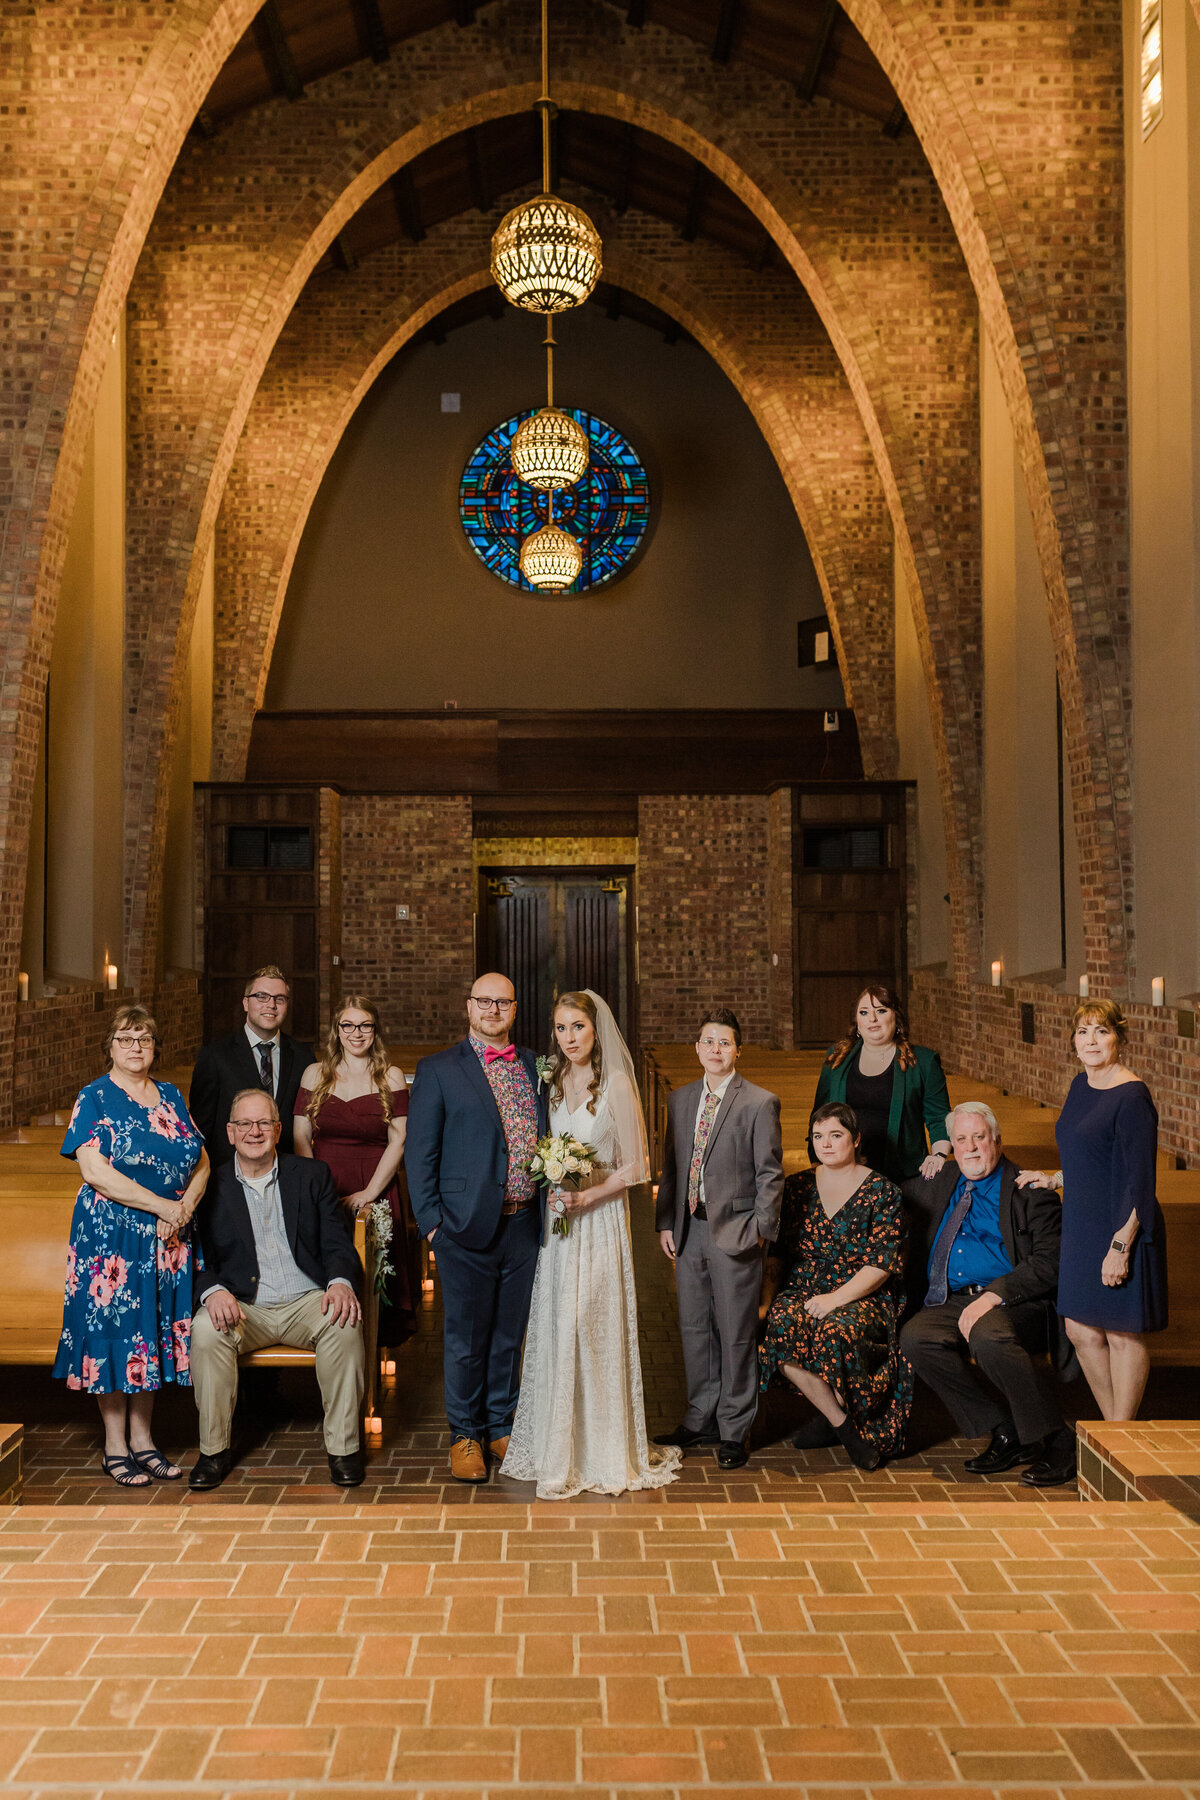 Portrait of a bride, groom, and their families after their wedding ceremony at the Little Chapel in the Woods at Texas Woman's University in Denton, Texas. The bride is on the right and is wearing an intricate white dress with a long veil while holding a bouquet. The groom is on the left and is wearing a navy suit with a patterned dress shirt and bowtie. Both families flank the couple on either side all in wedding guest attire. They whole group is backed by the intricate and intimate architecture of the chapel.